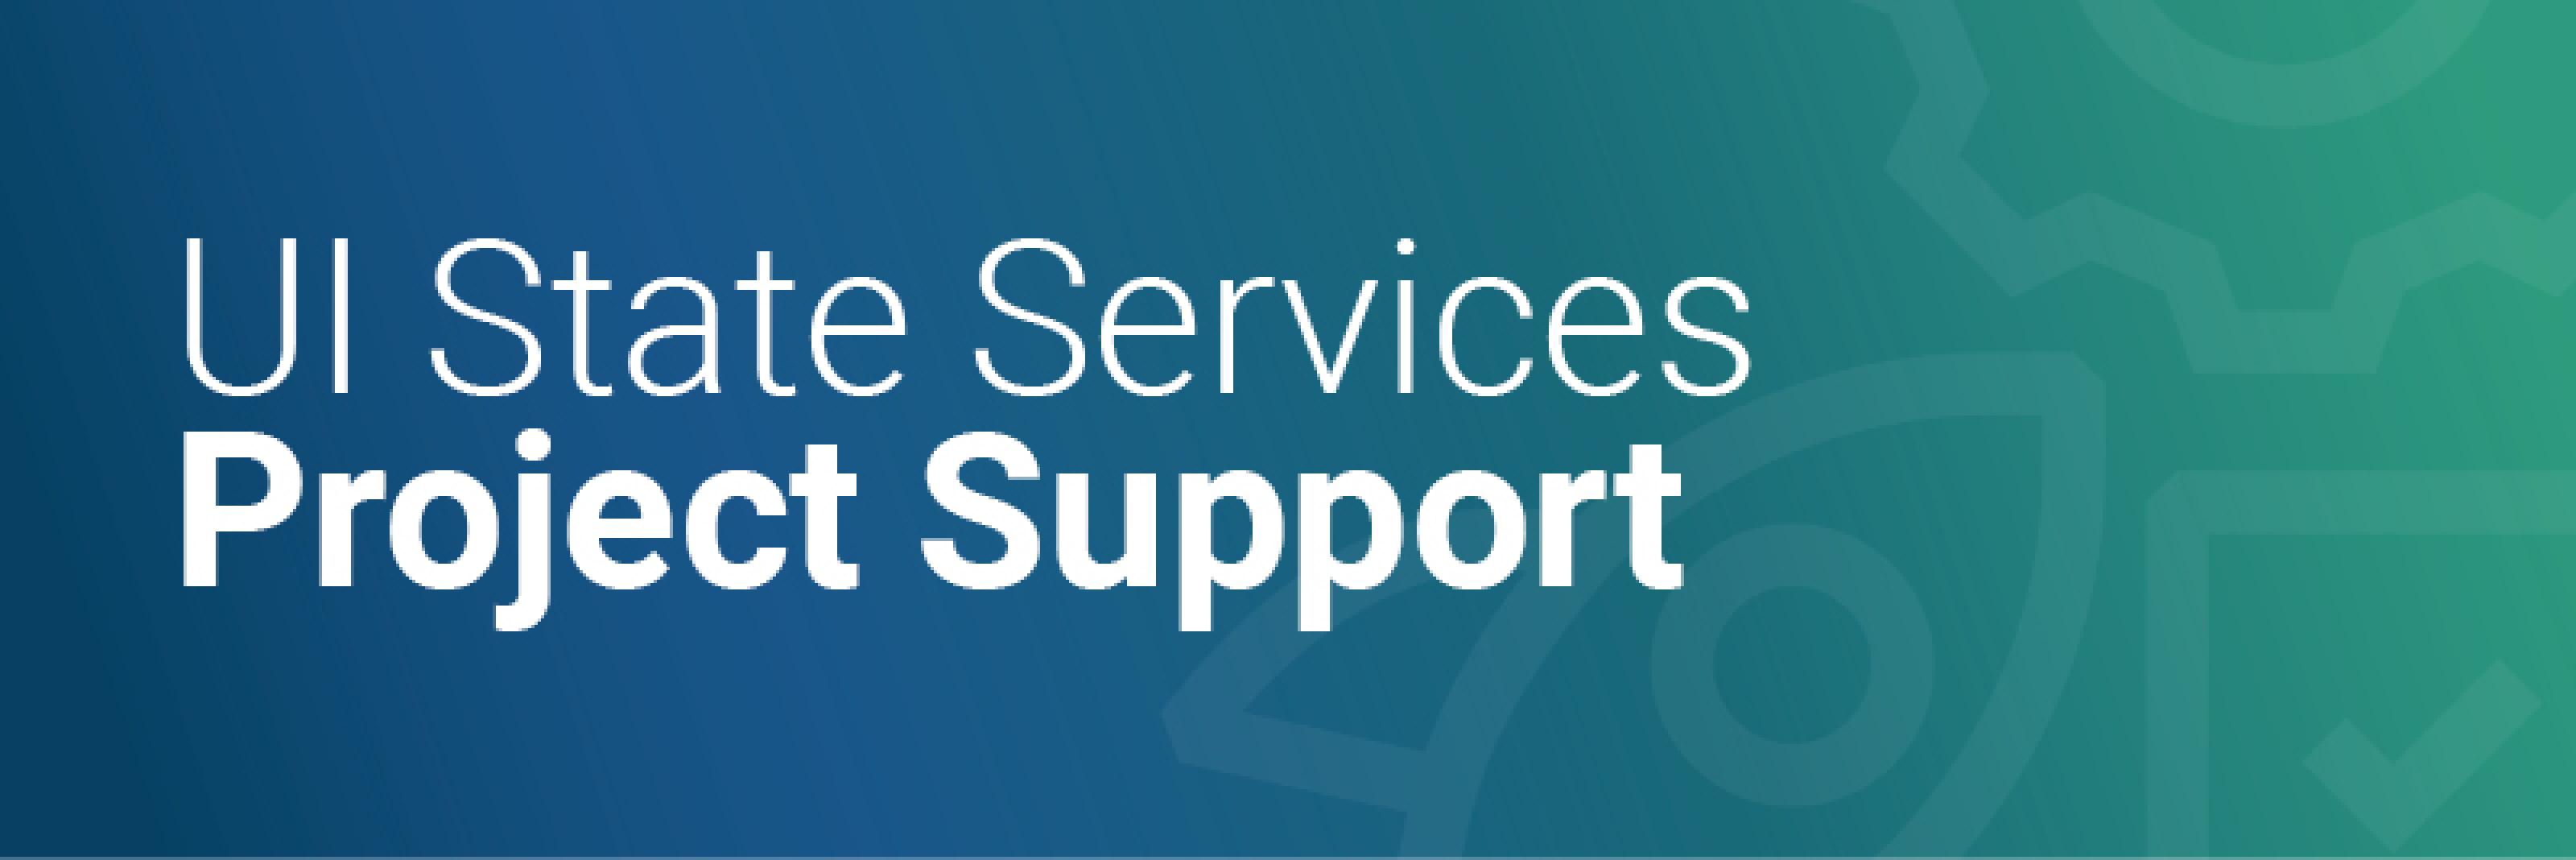 UI State Services Project Support